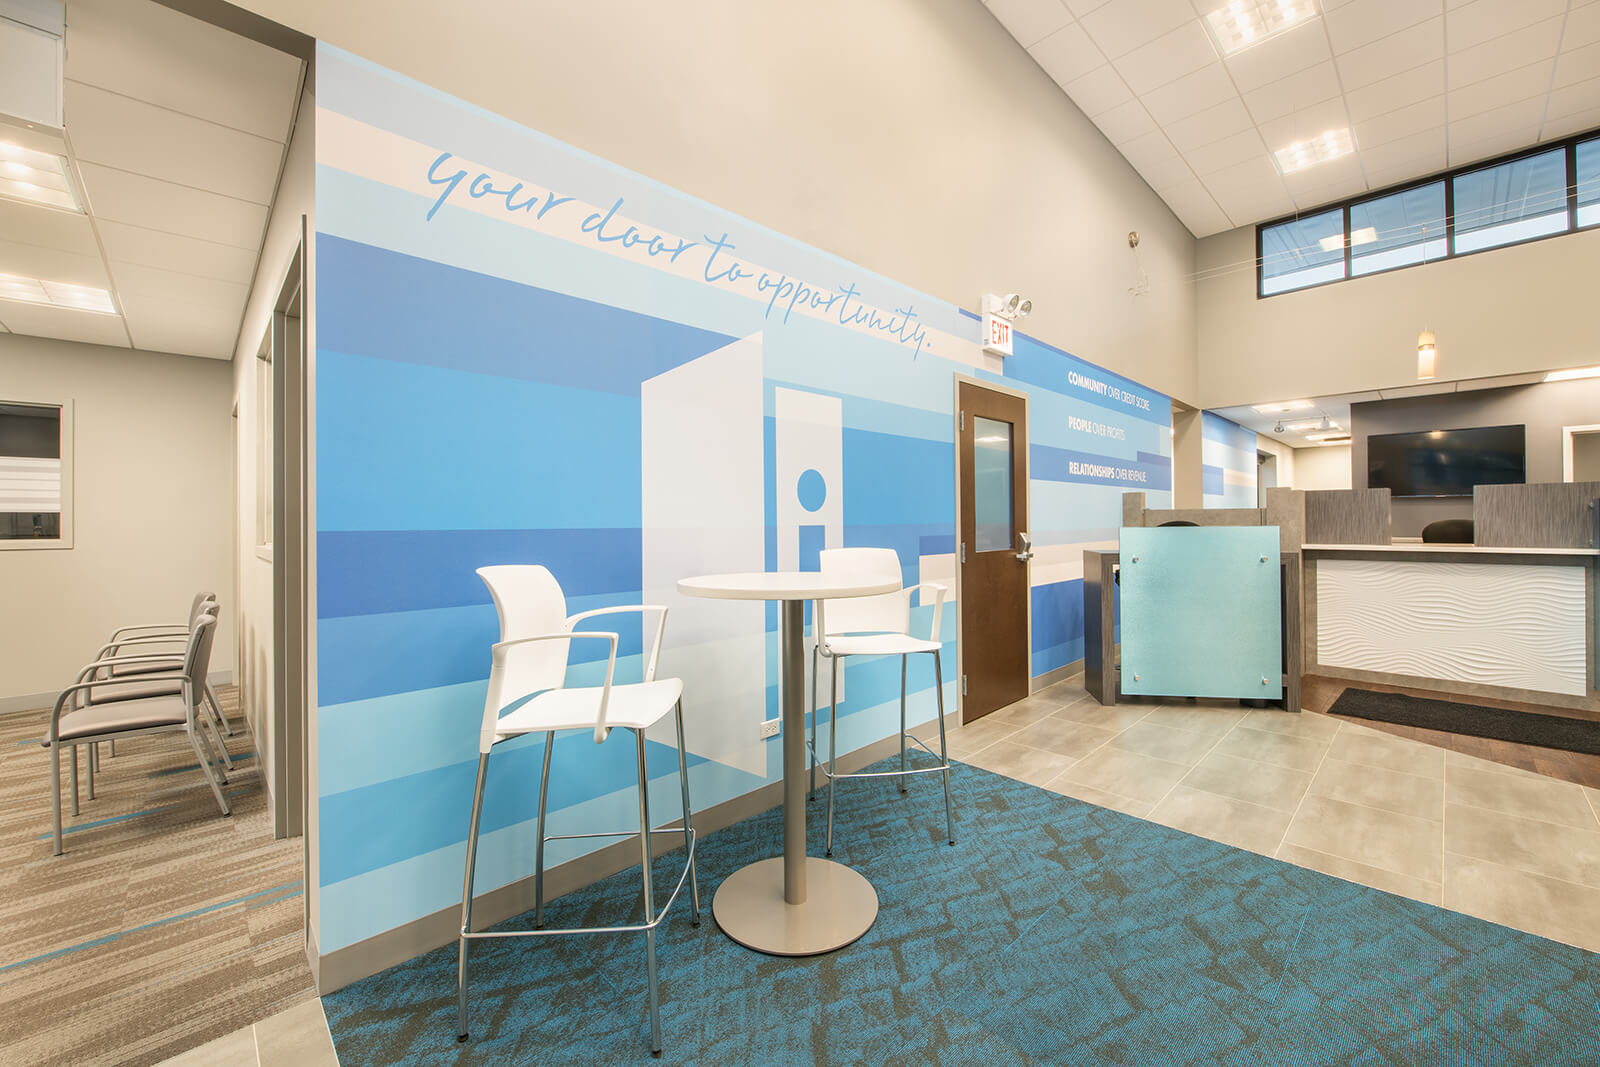 Branded lobby space in a credit union